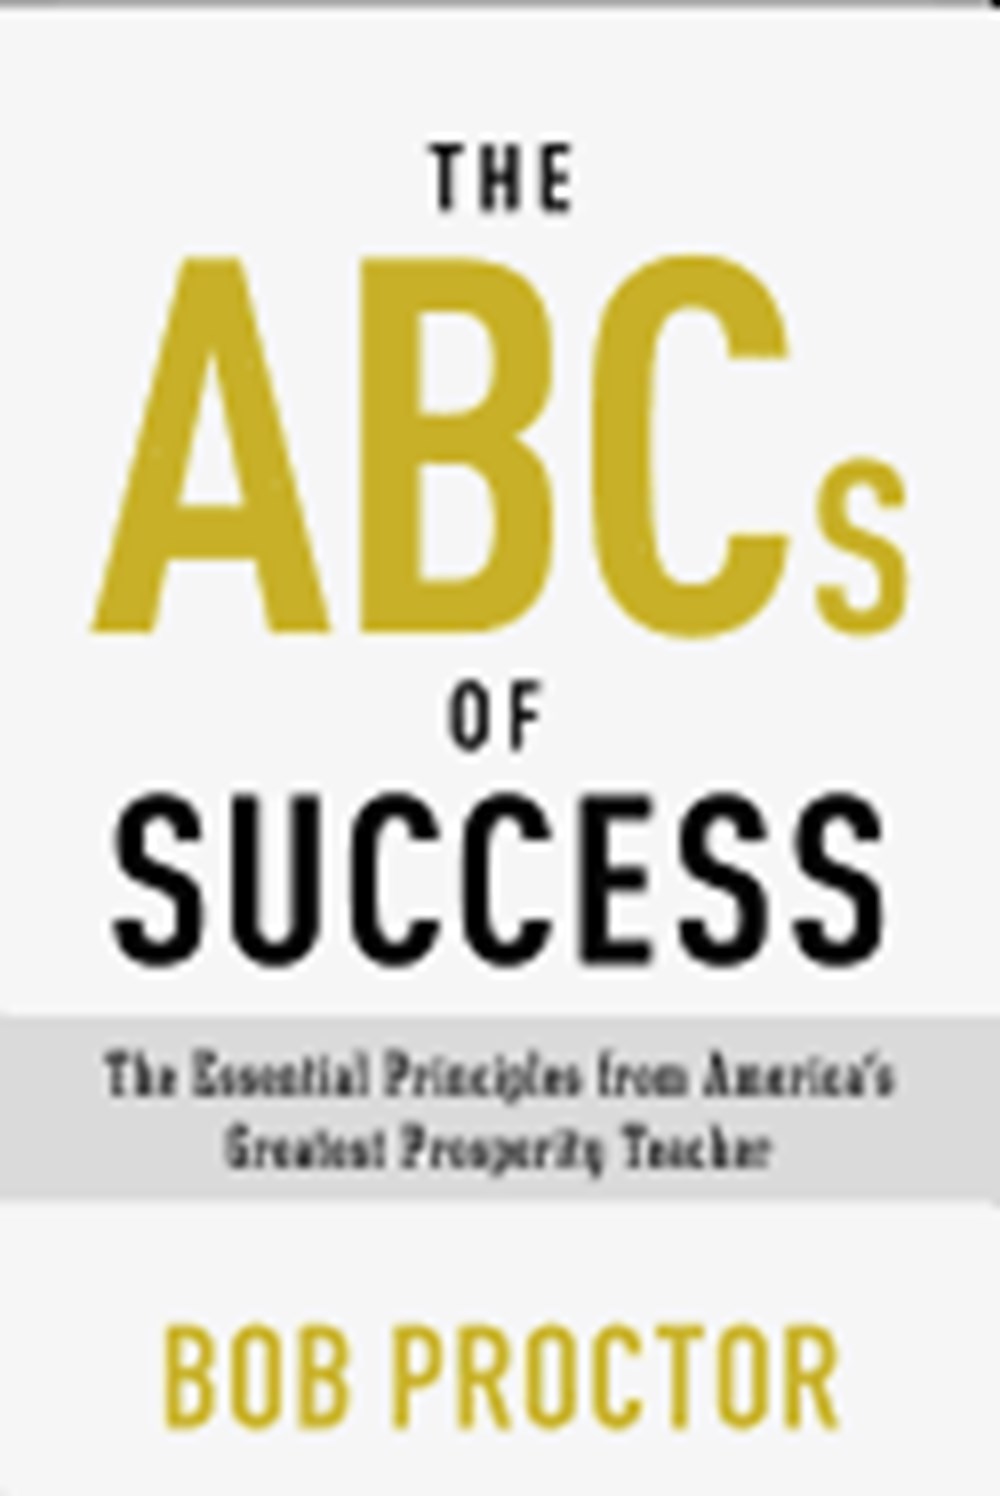 ABCs of Success The Essential Principles from America's Greatest Prosperity Teacher